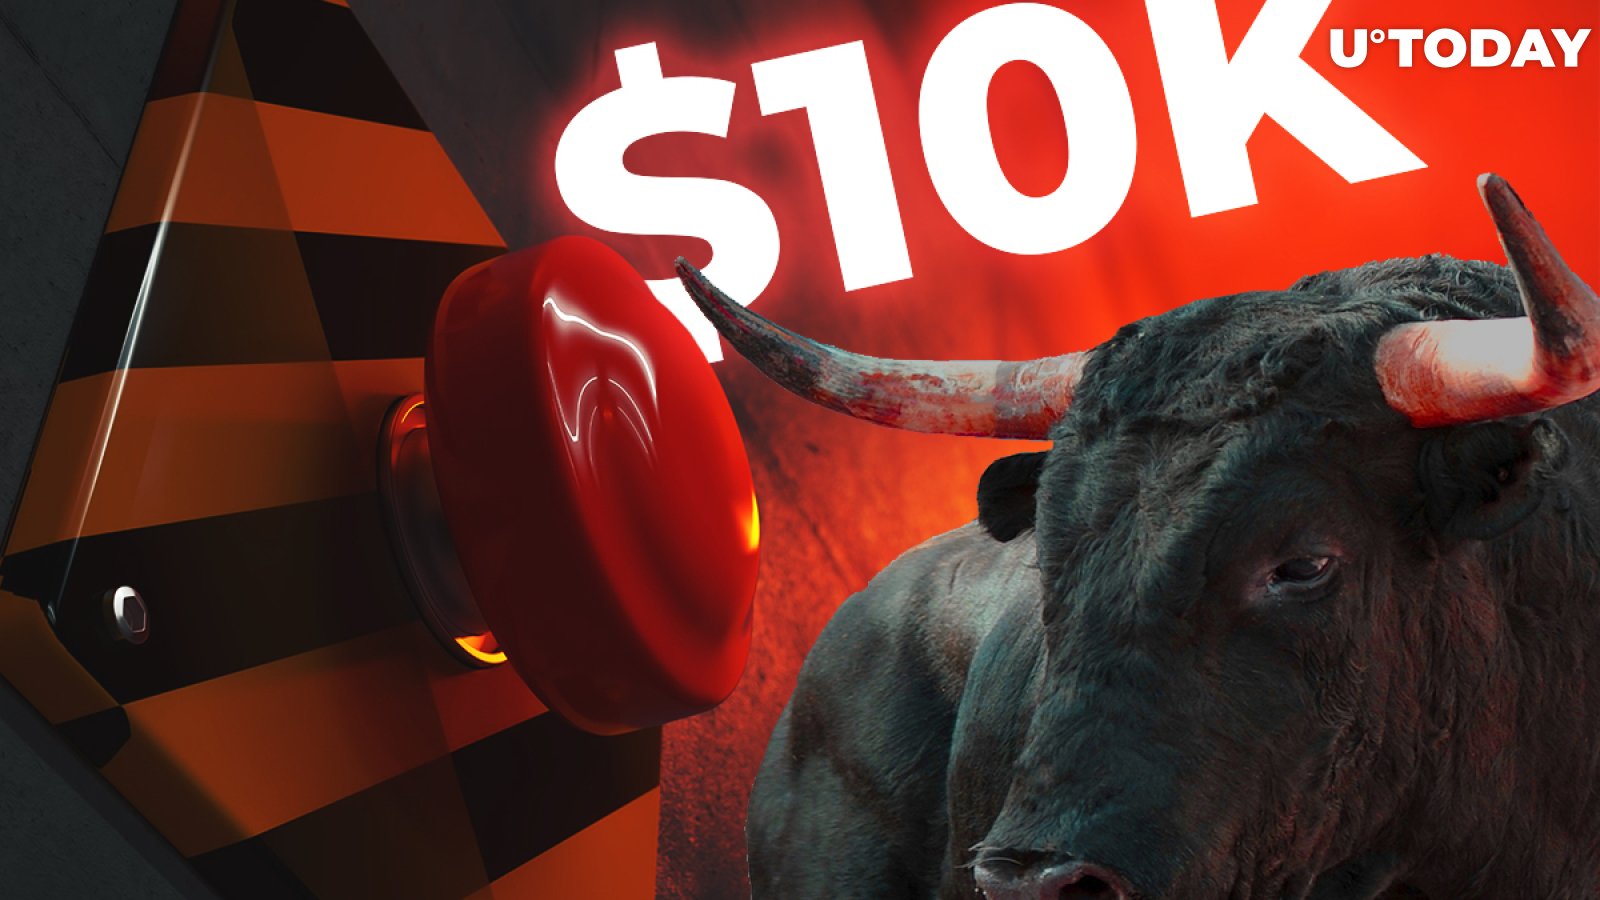 Bulls Will Push BTC Price to $10K Before Leaving the Scene. When Will the Predicted Bitcoin Dump Happen?